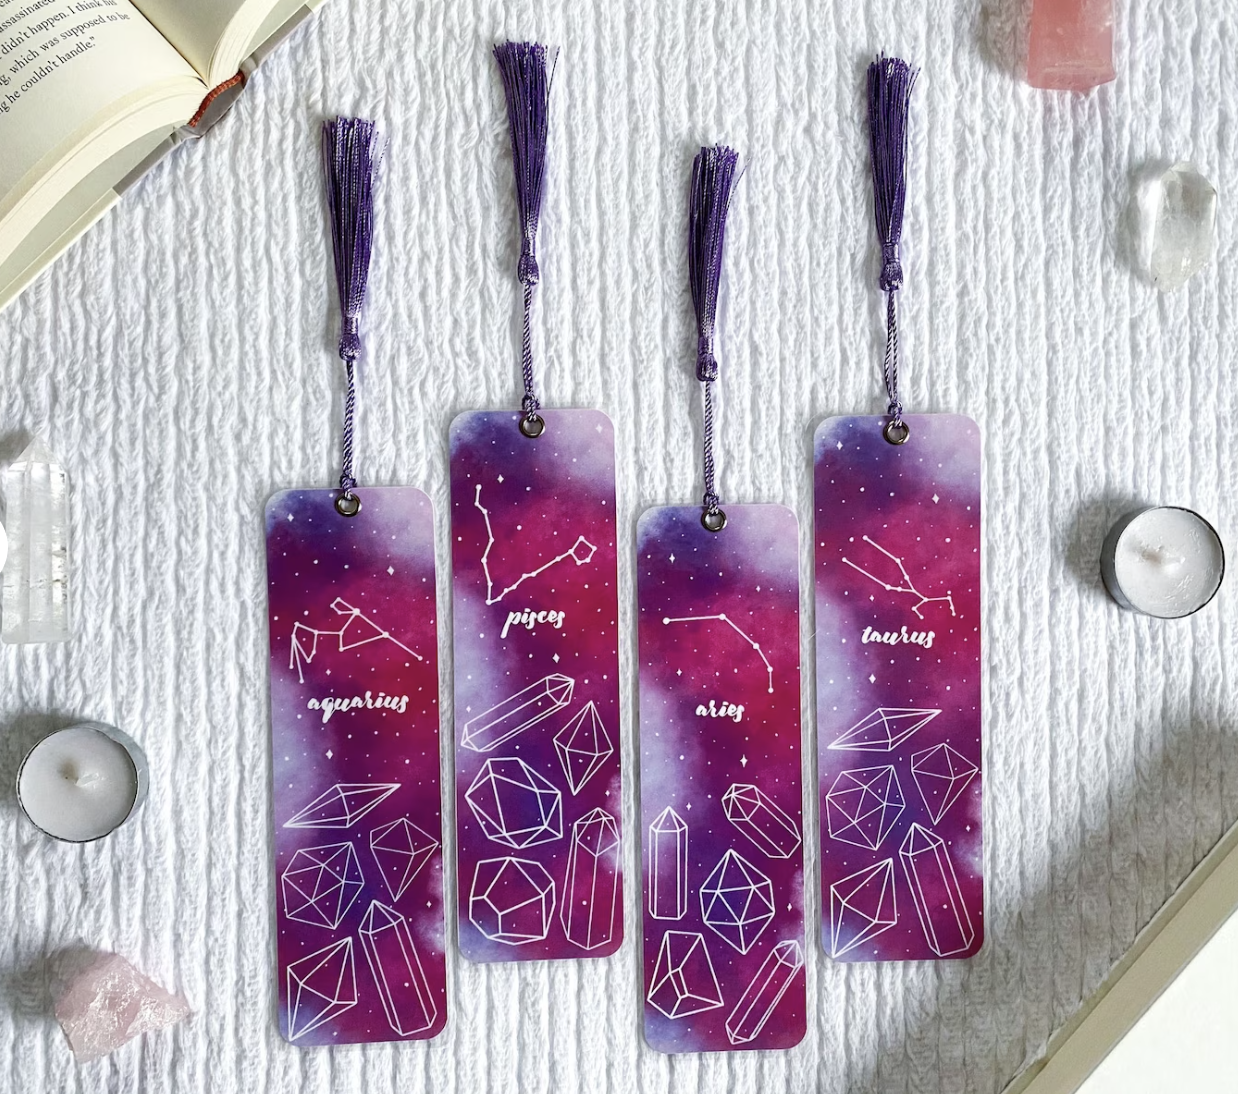 Four bookmarks with purple tassels, purple and pink watercolor designs and various zodiac signs and matching constellations on a white backdrop